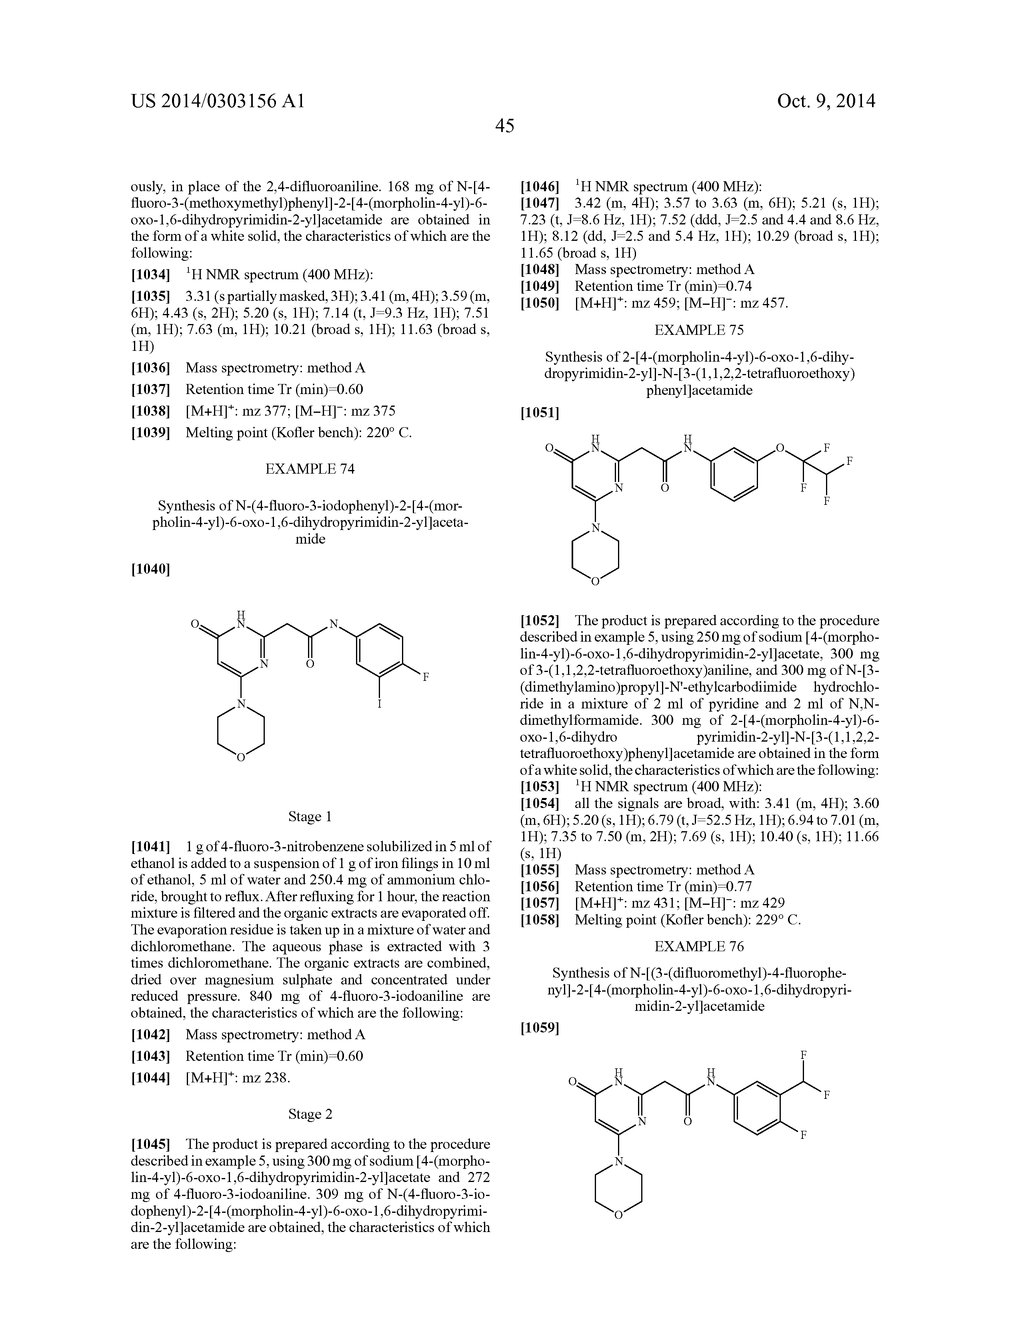 NOVEL (6-OXO-1,6-DIHYDROPYRIMIDIN-2-YL)AMIDE DERIVATIVES, PREPARATION     THEREOF AND PHARMACEUTICAL USE THEREOF AS AKT(PKB) PHOSPHORYLATION     INHIBITORS - diagram, schematic, and image 46